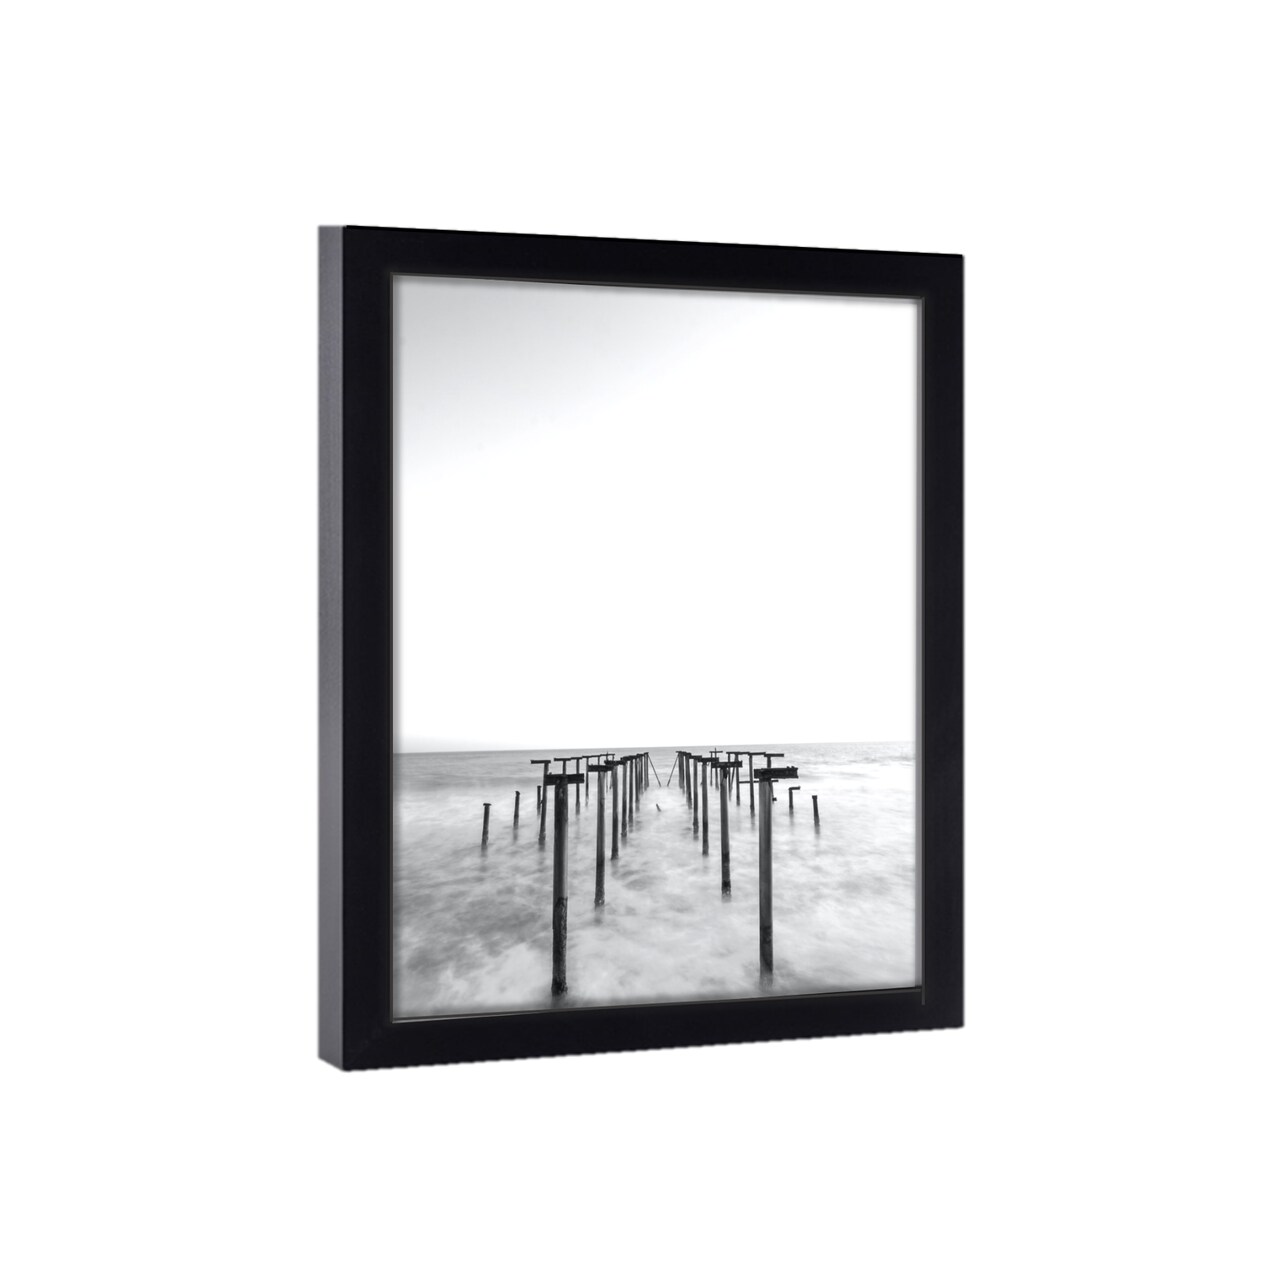 Black 40x60 Picture Frame for 40 x 60 Poster, Photo or Art - Gallery Wall  Hanging